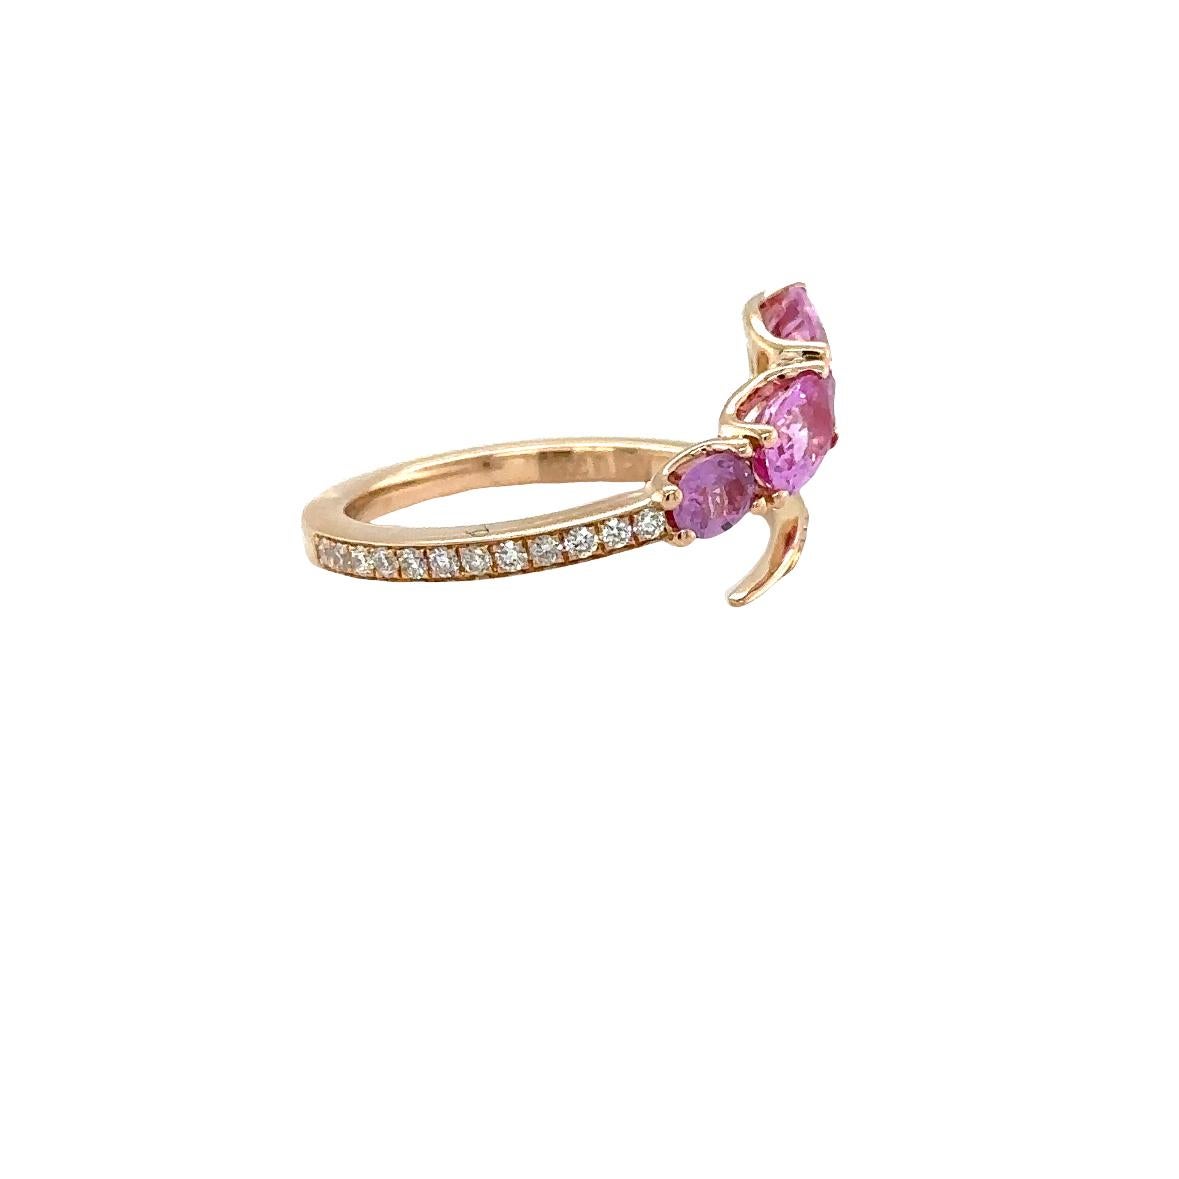 Introducing the Riad Ring in 18kt Rose Gold, weighing 3.30 grams. This exquisite piece features an Oval Pink Sapphire weighing 1.74 carats and is adorned with G color, VS clarity diamonds totaling 0.26 carats.

The Riad Ring is a stunning addition